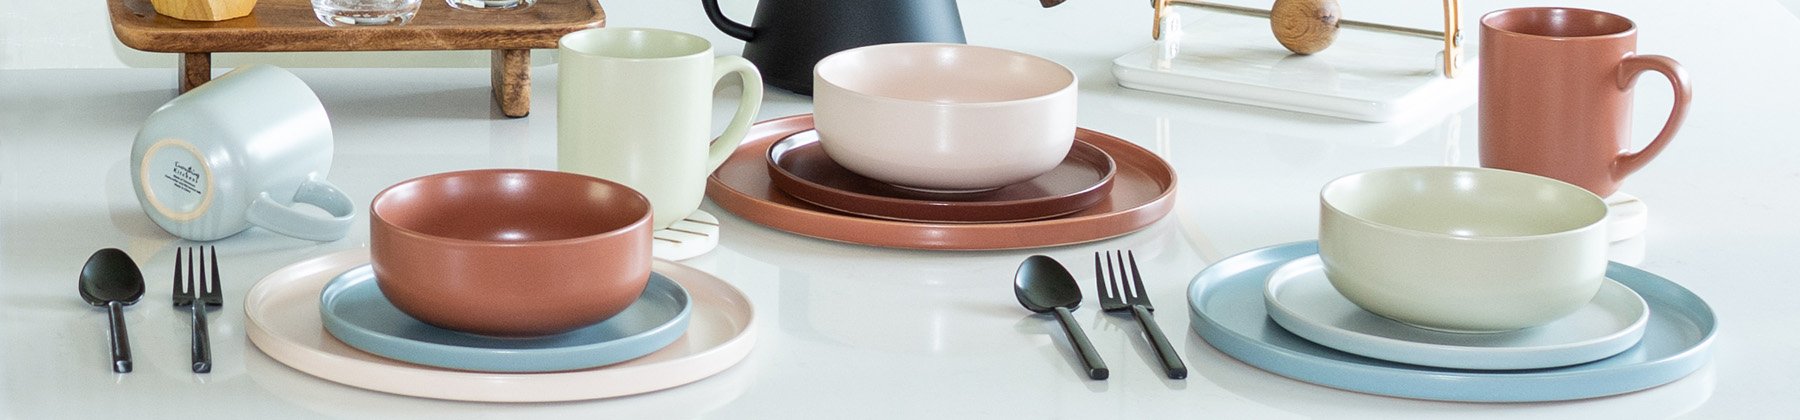 Photo of Everything Kitchens Exclusive, Modern Flat Dinnerware.